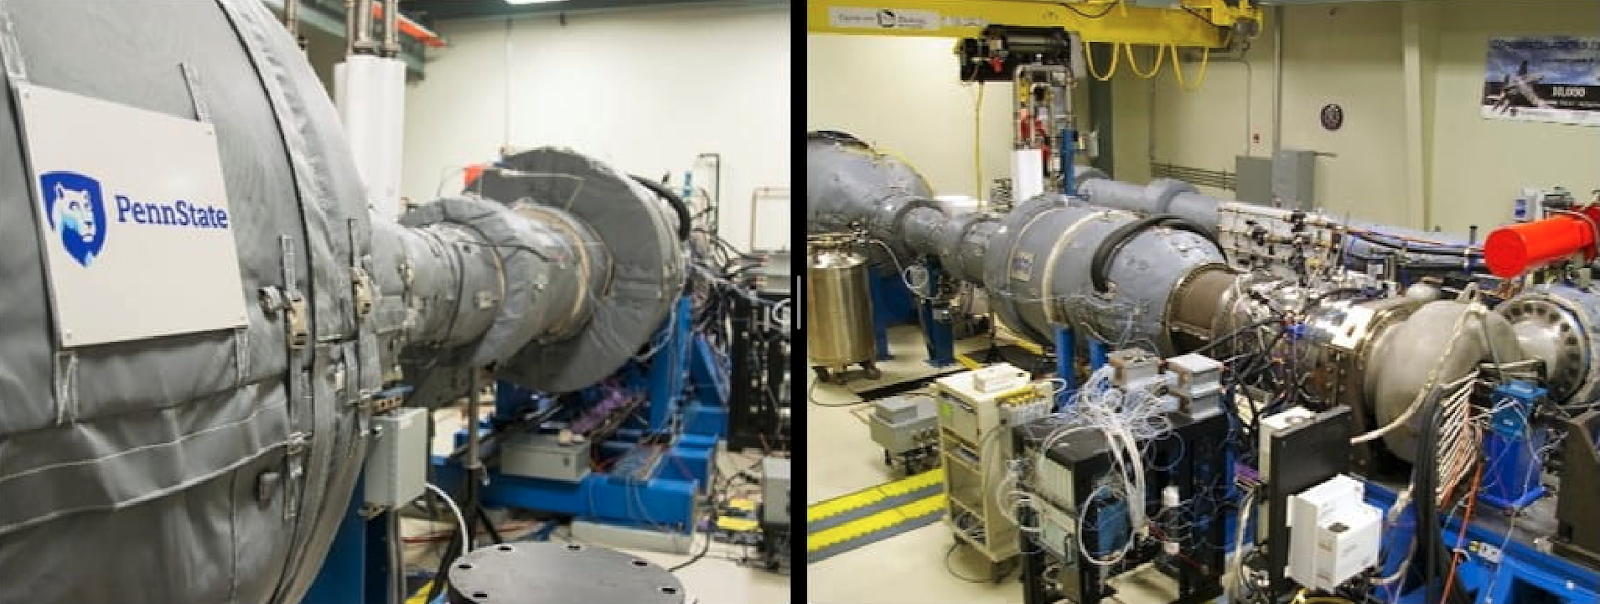 Photos of Penn State’s START system: The left image shows the flow path facing the one-stage test section, which is displayed in more detail on the right, along with the instrumentation. 